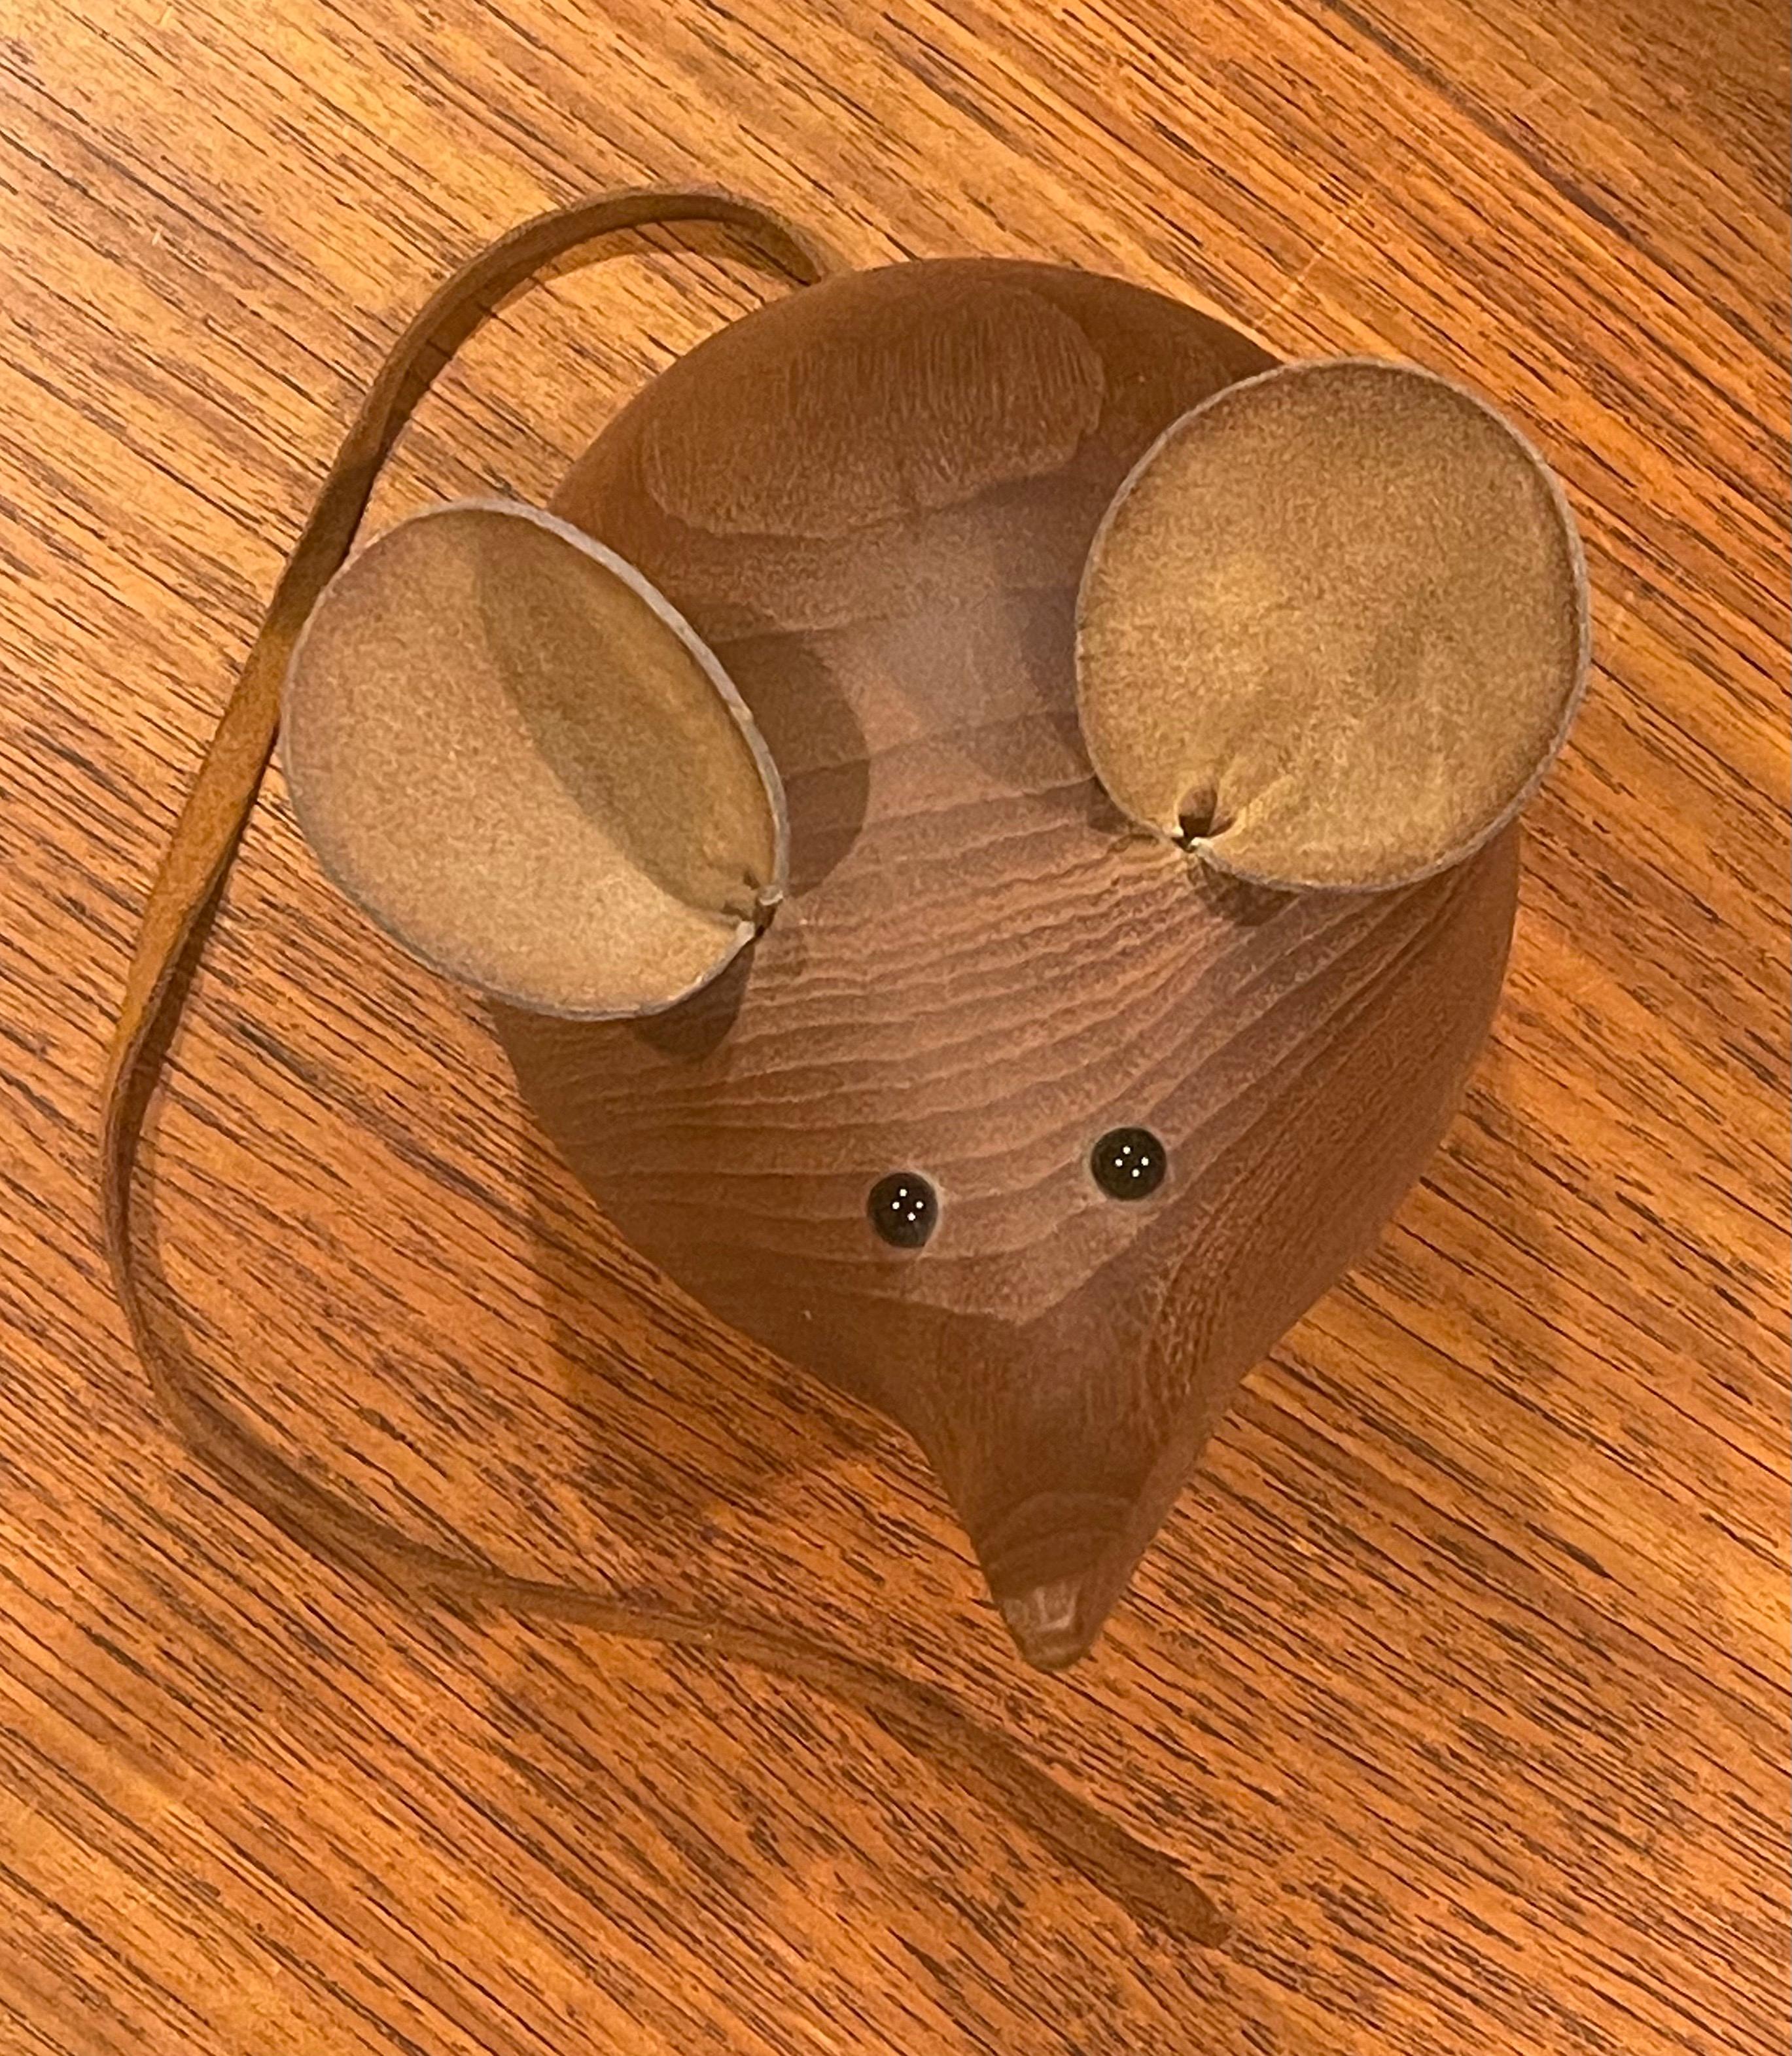 A very cool Mid-Century Modern mouse carving / sculpture in teak by H&F of Denmark, circa 1960s. A super cool and rare piece with a teak body, leather ears and tail (21